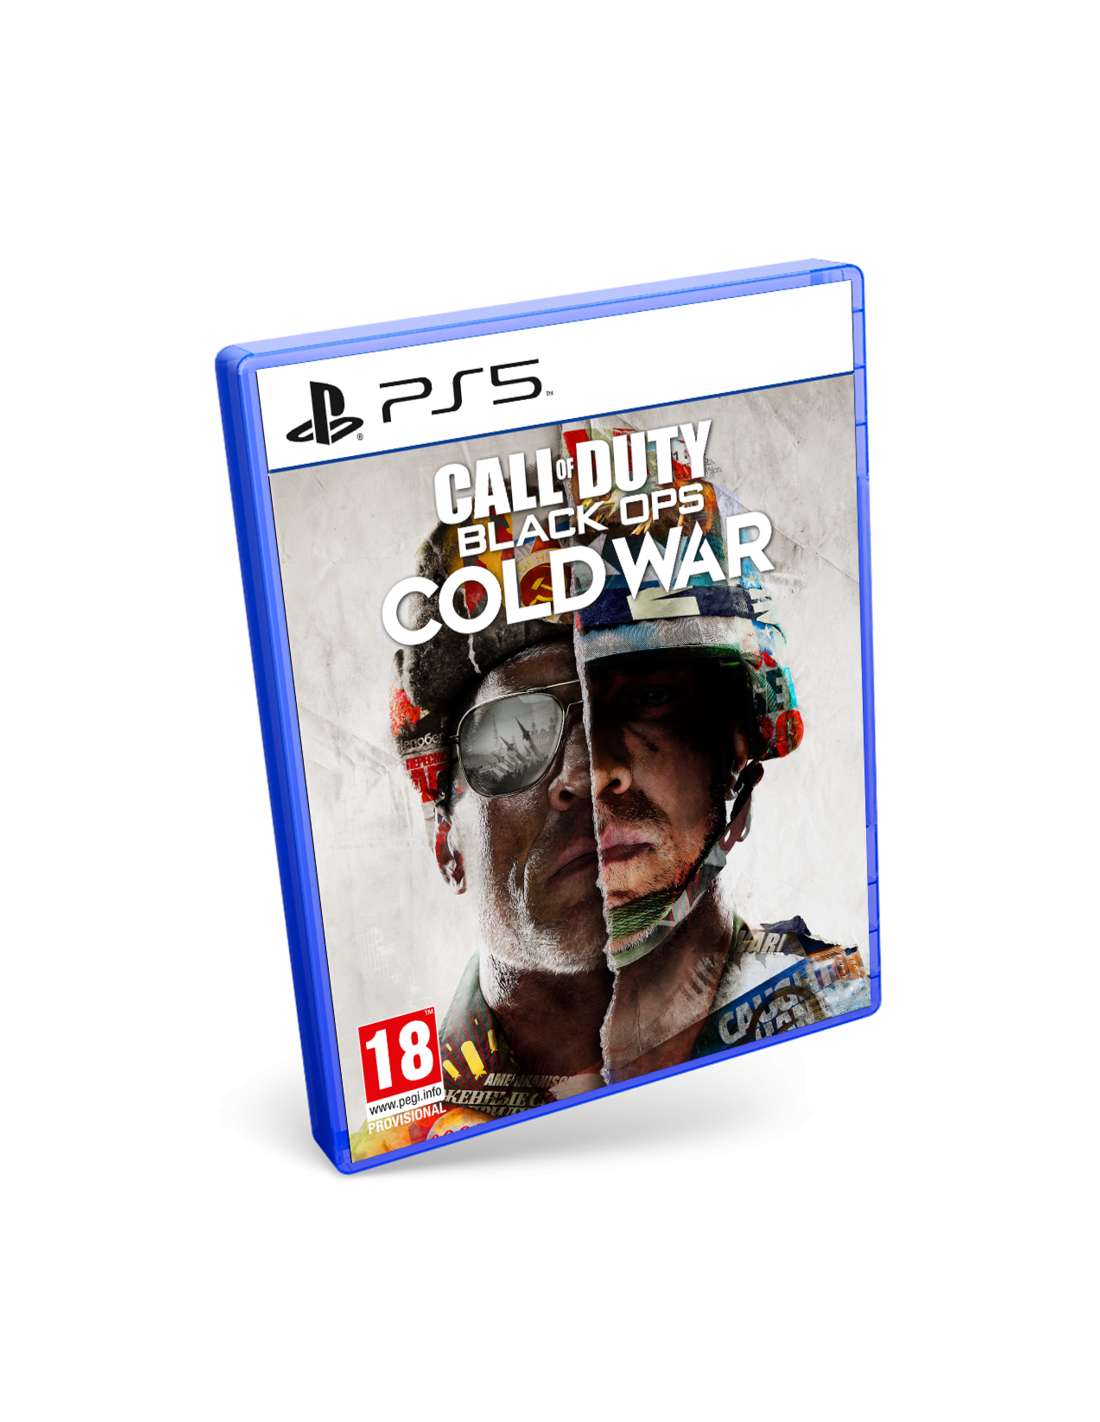 call of duty: black ops cold war ps5 bundle